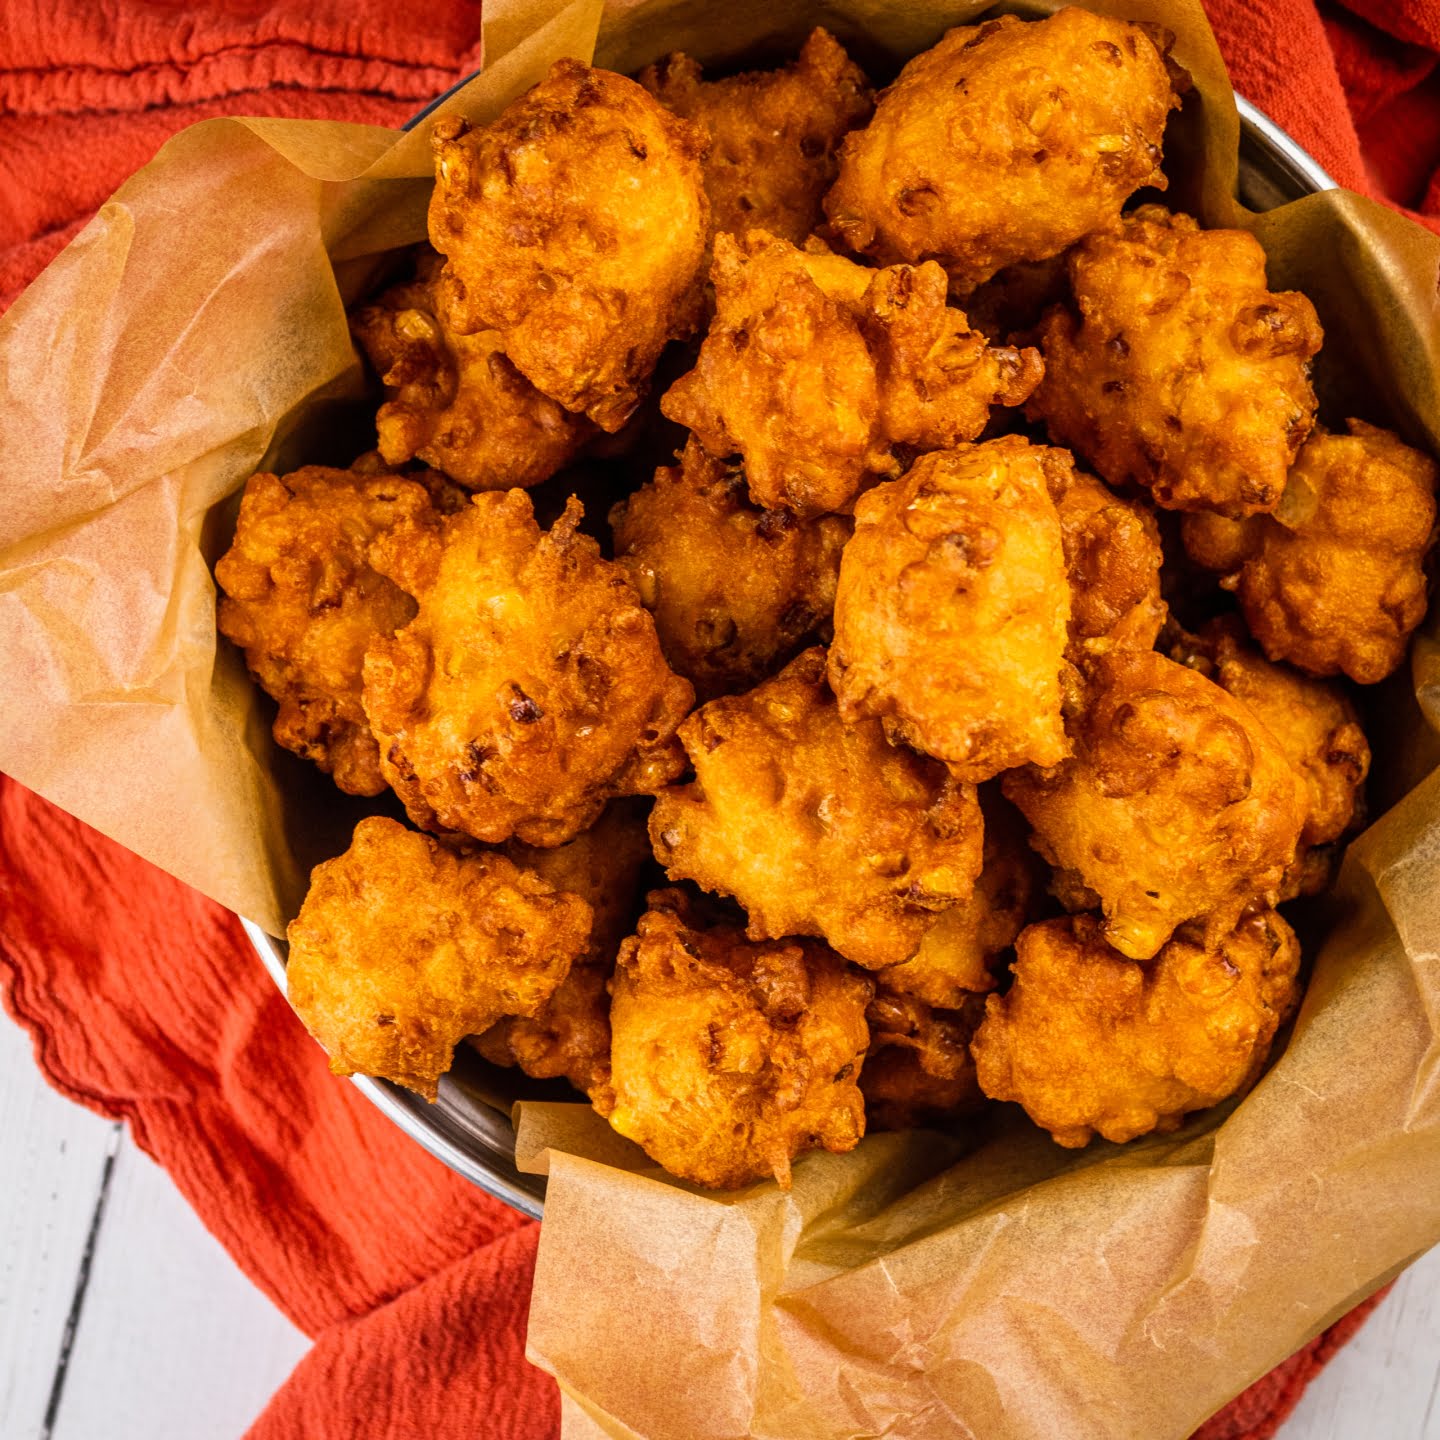 corn nuggets in a basket